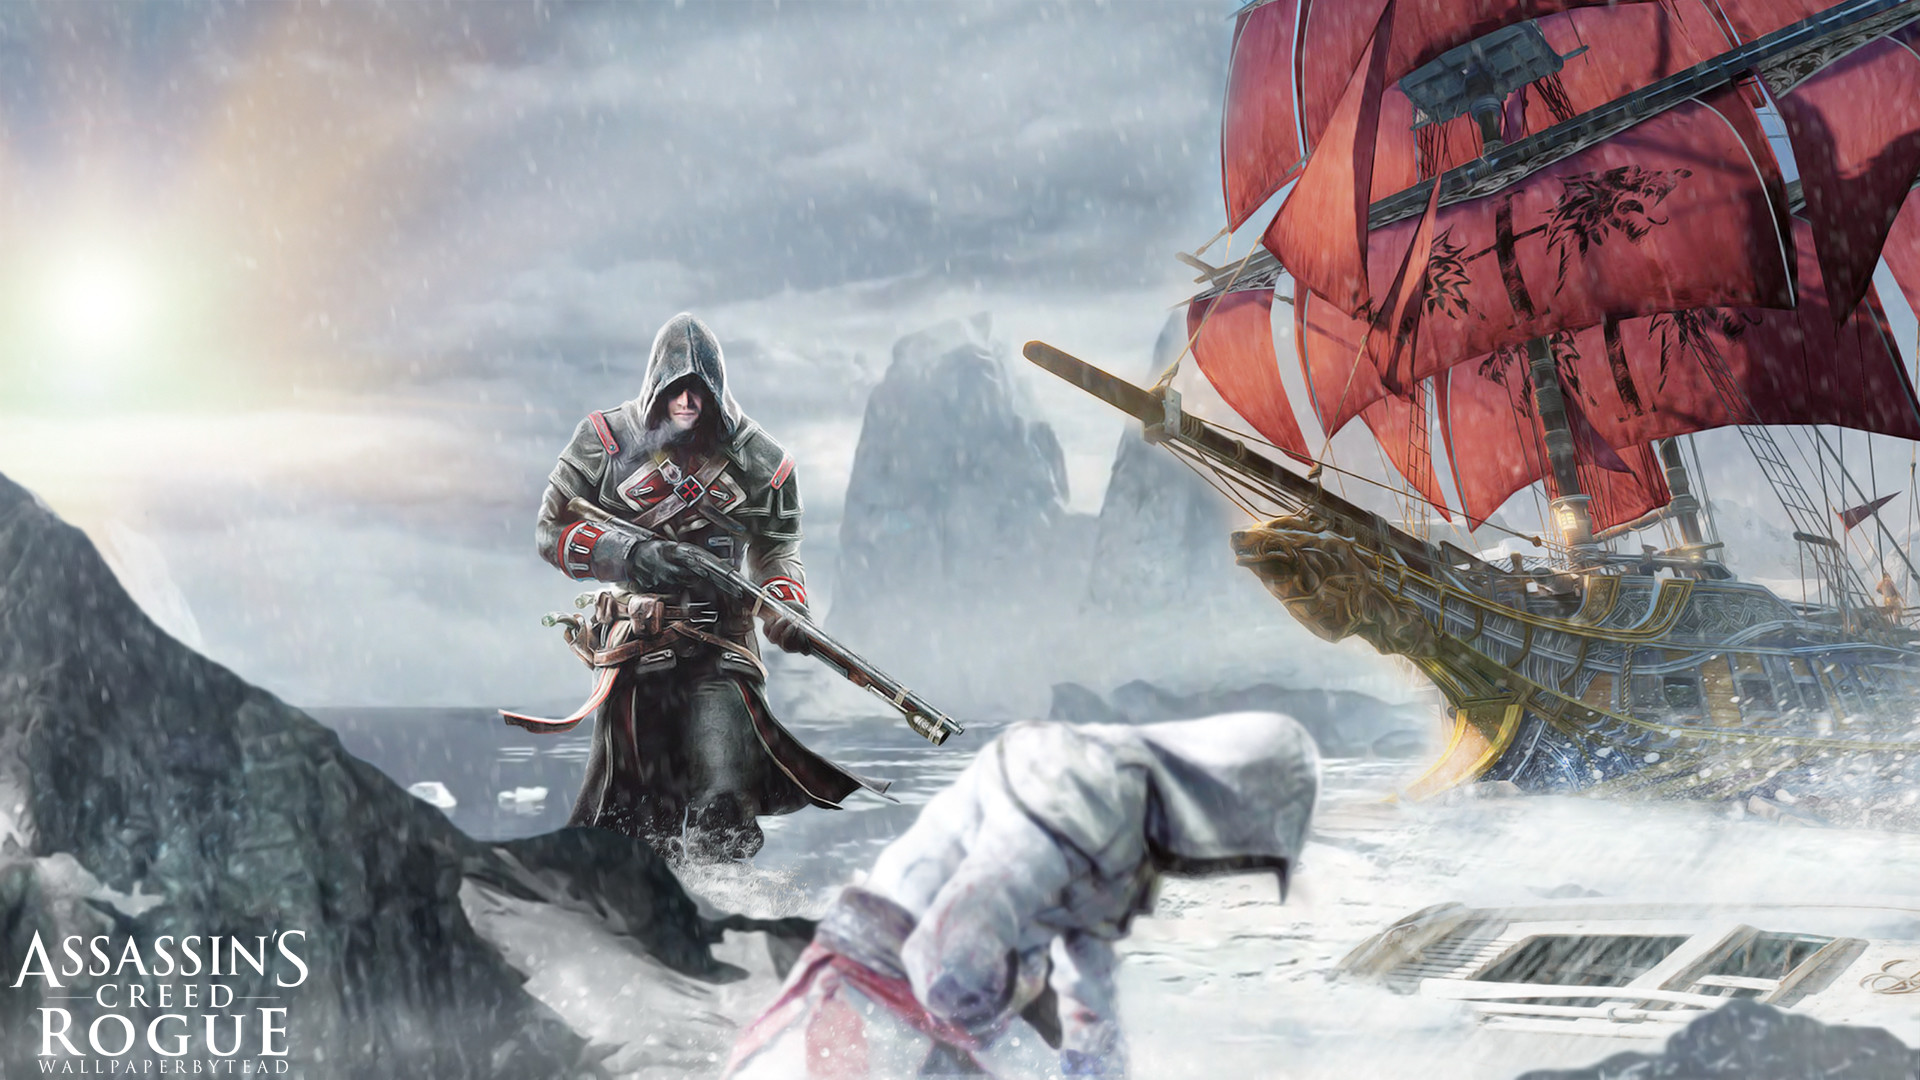 1920x1080 ... Assassin's Creed Rogue wallpaper by teaD by santap555